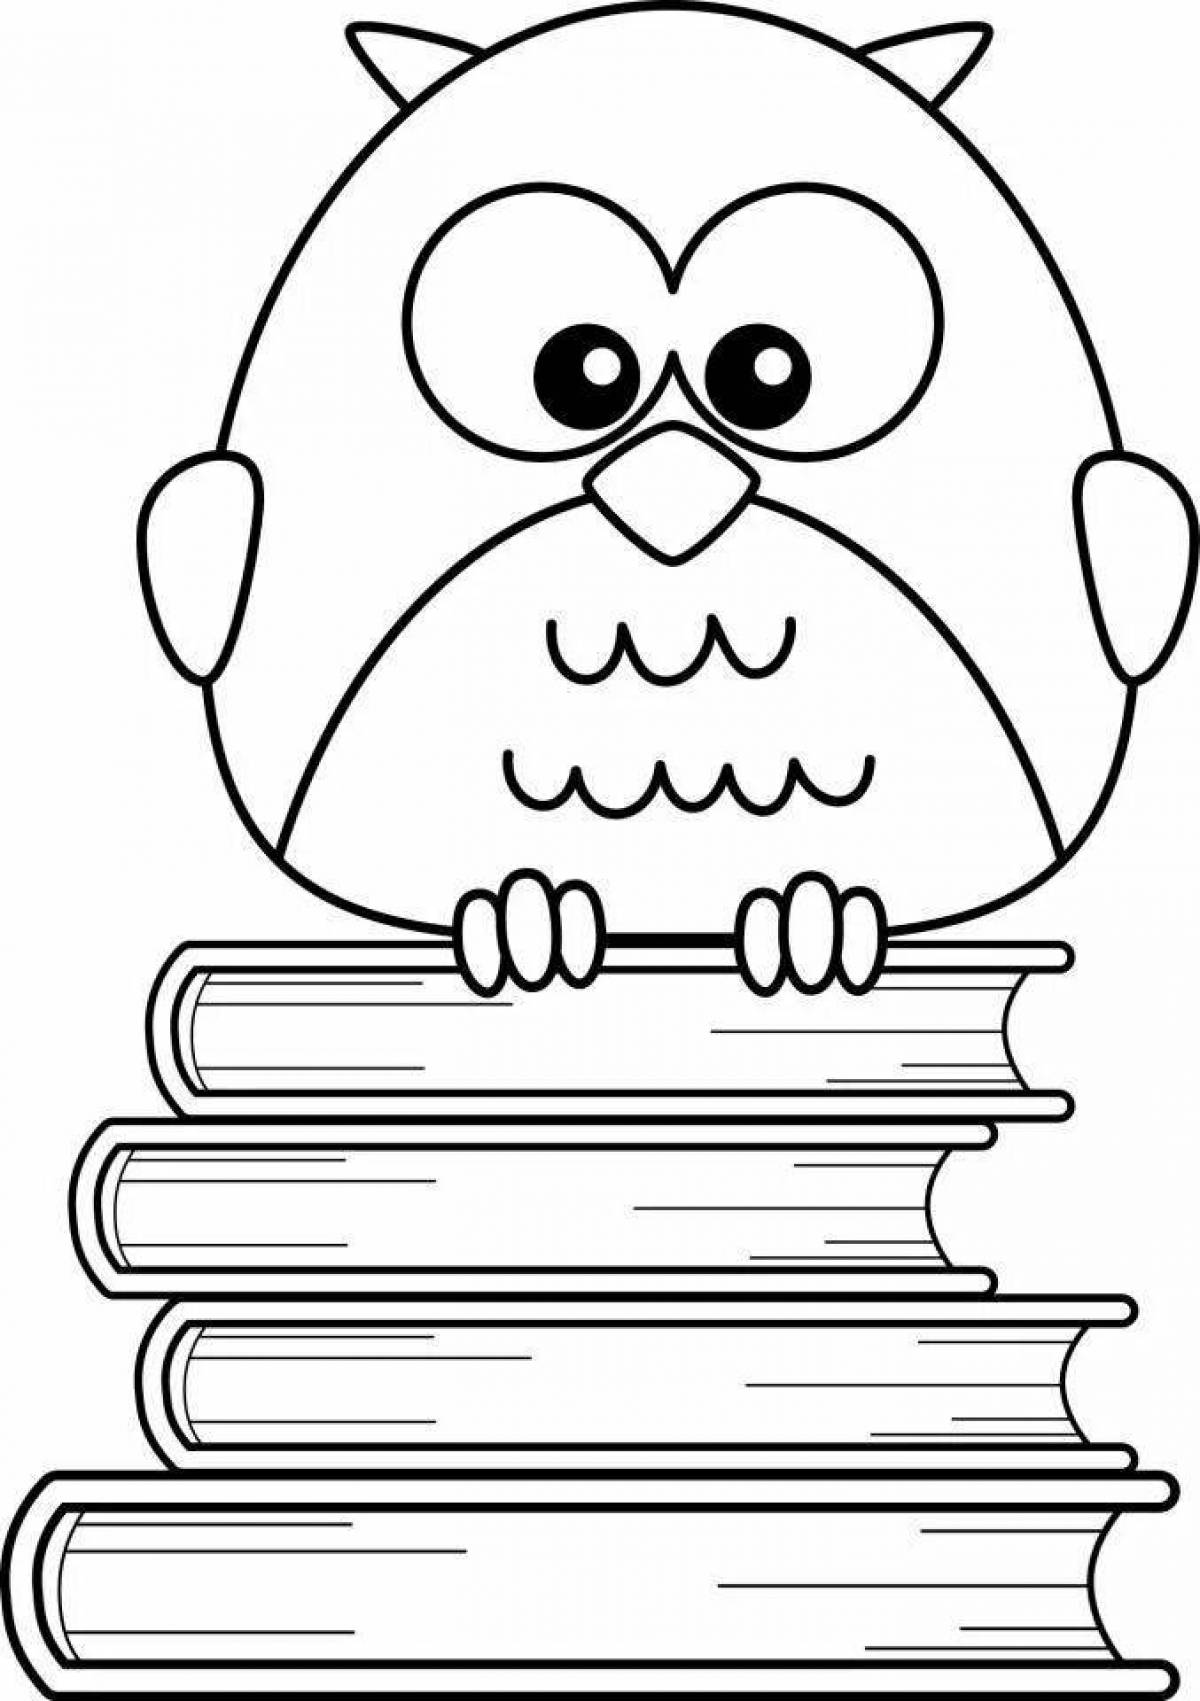 Wise owl coloring book with globe of wisdom